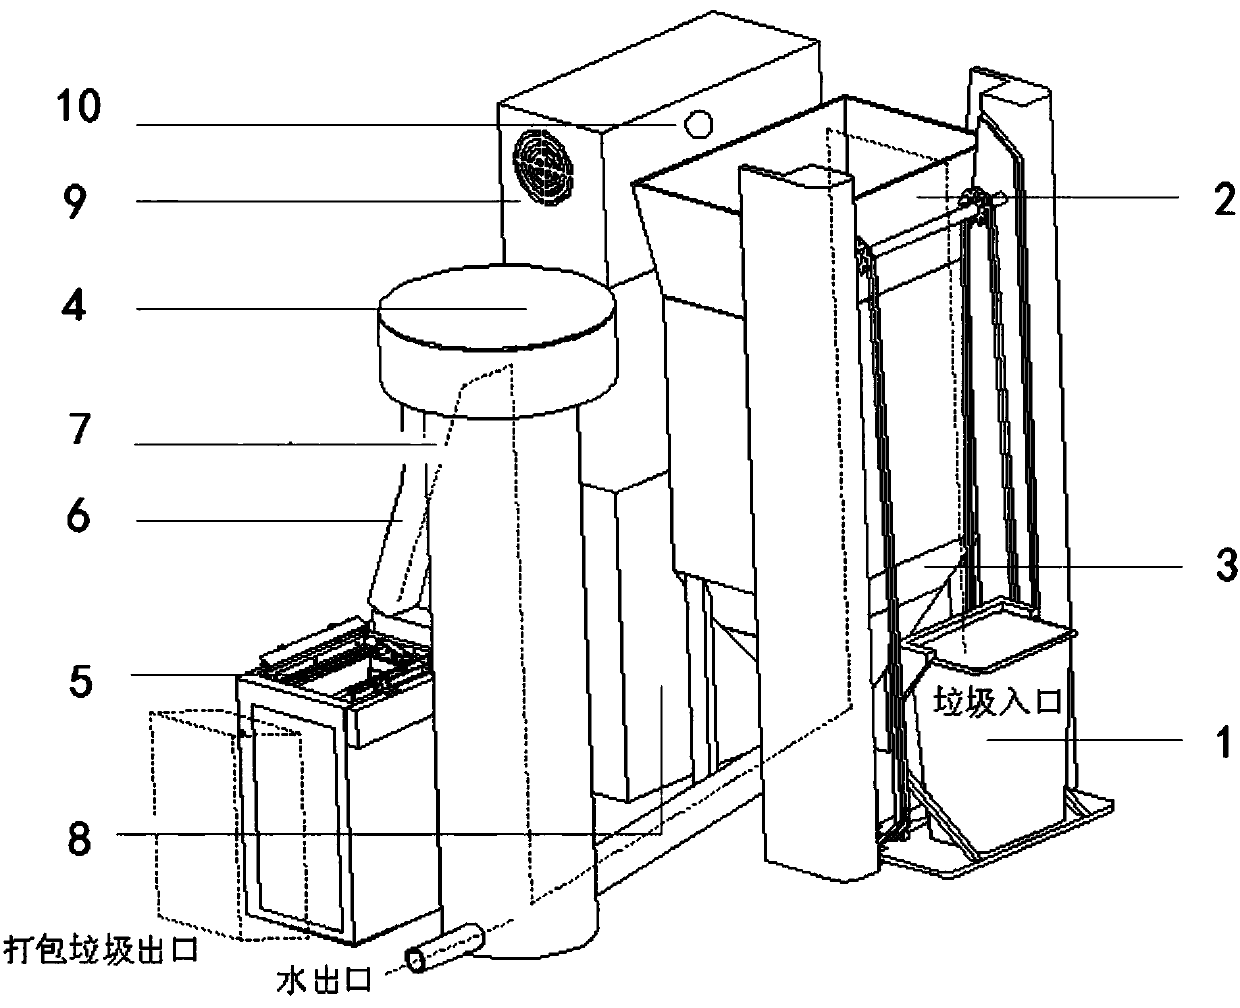 Local packaging type comprehensive processing method and processing monitoring platform for garbage